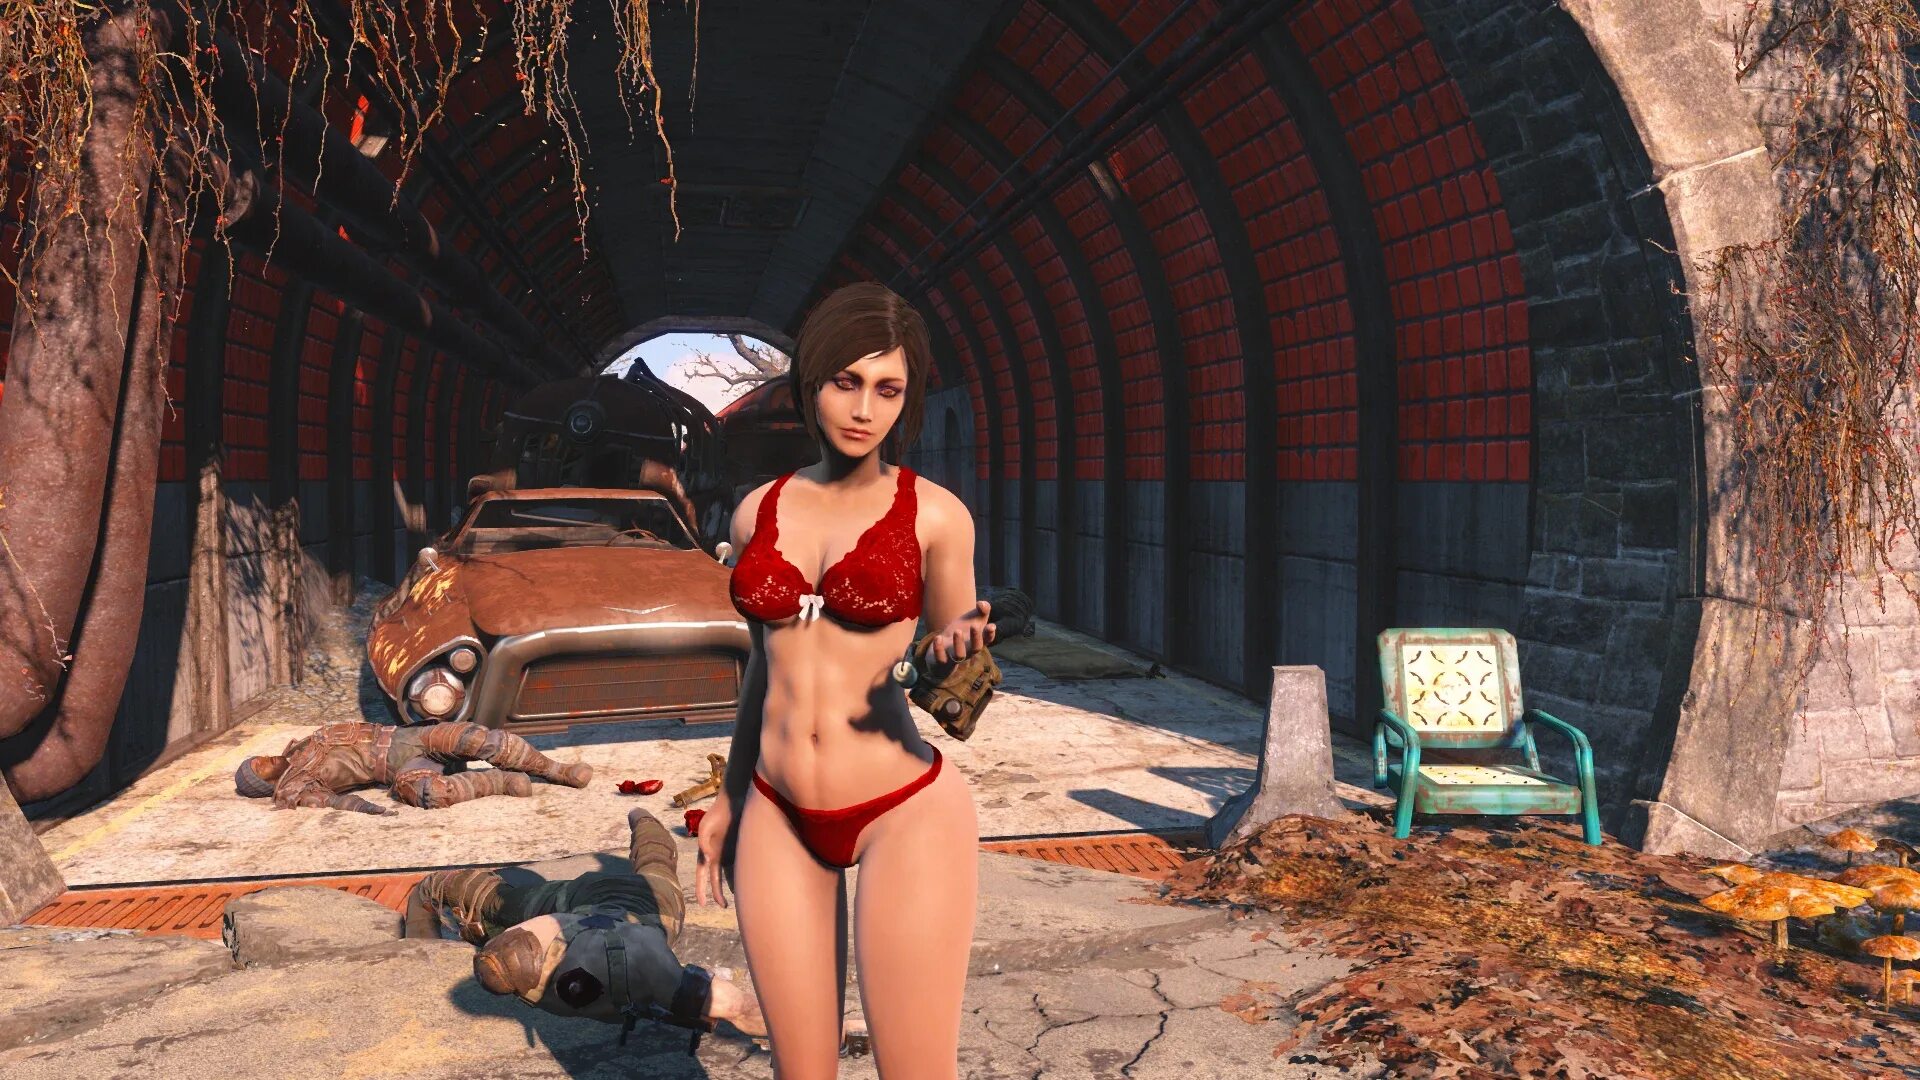 Фоллаут Bodyslide. Fallout 4 CBBE Lacy. Bodyslide Fallout 4. Fallout 4 Bodyslide CBBE preset.